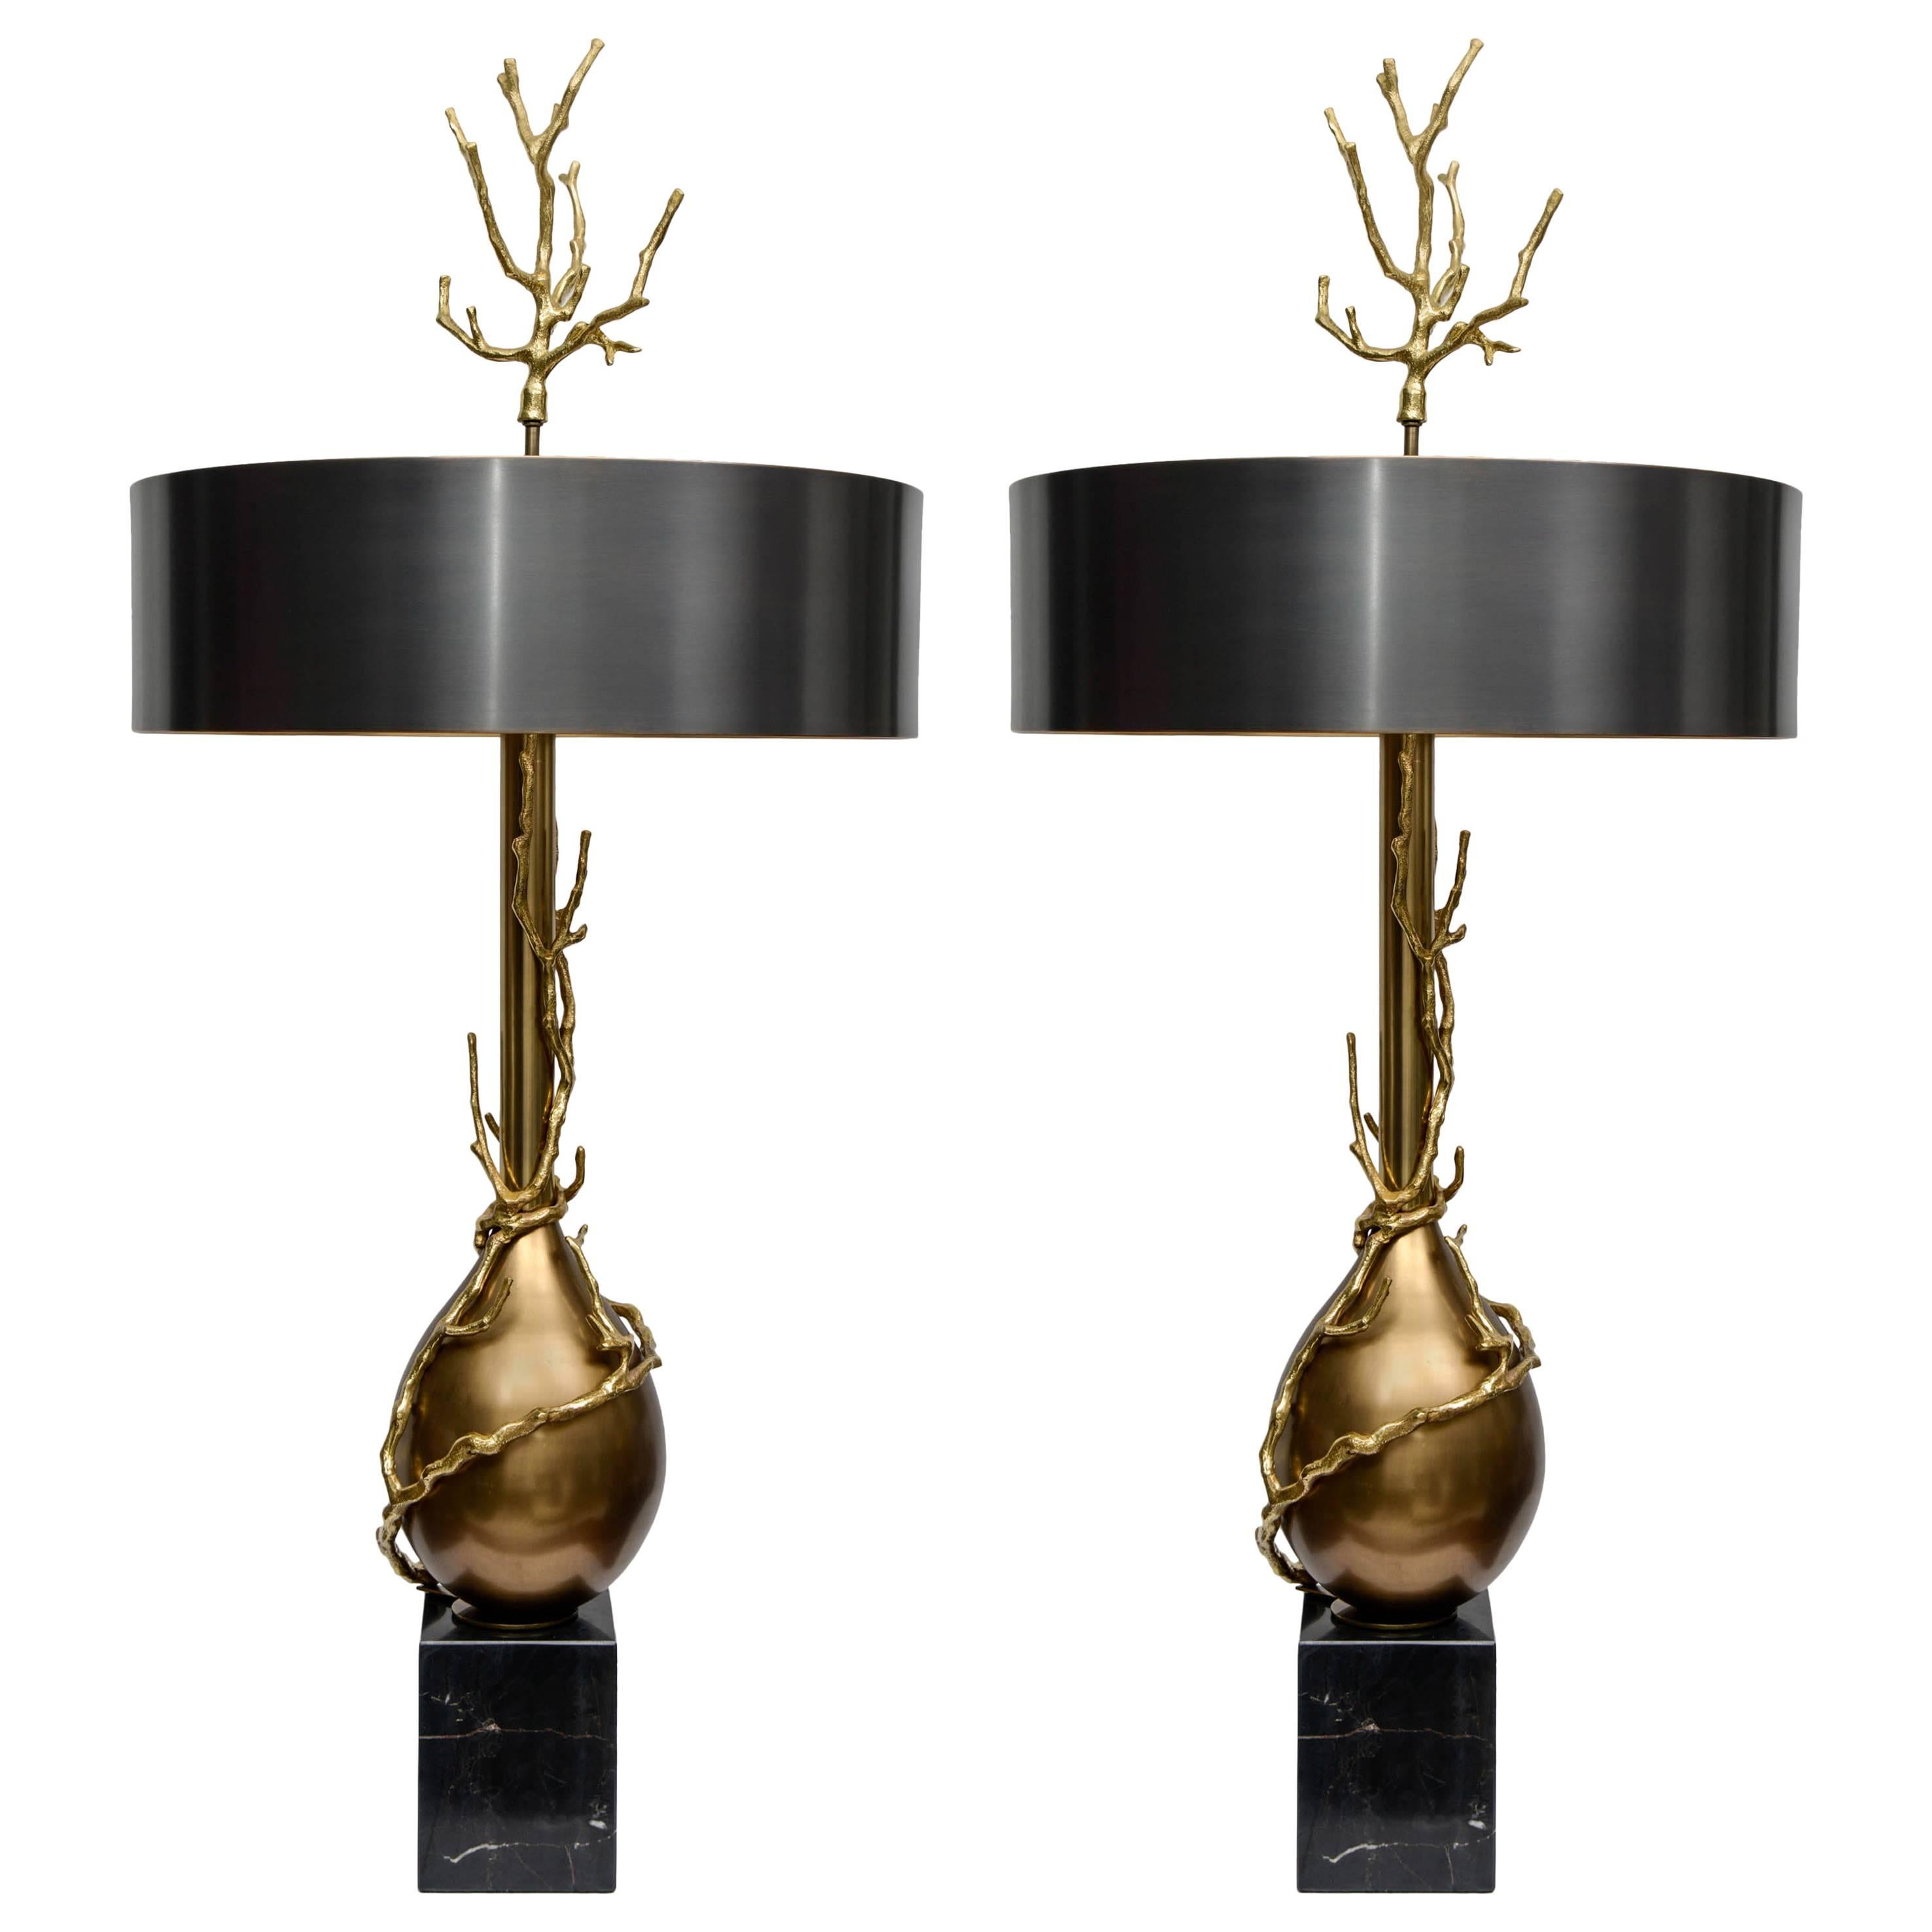 Magnificent Pair of Lamps with a Coral Decor